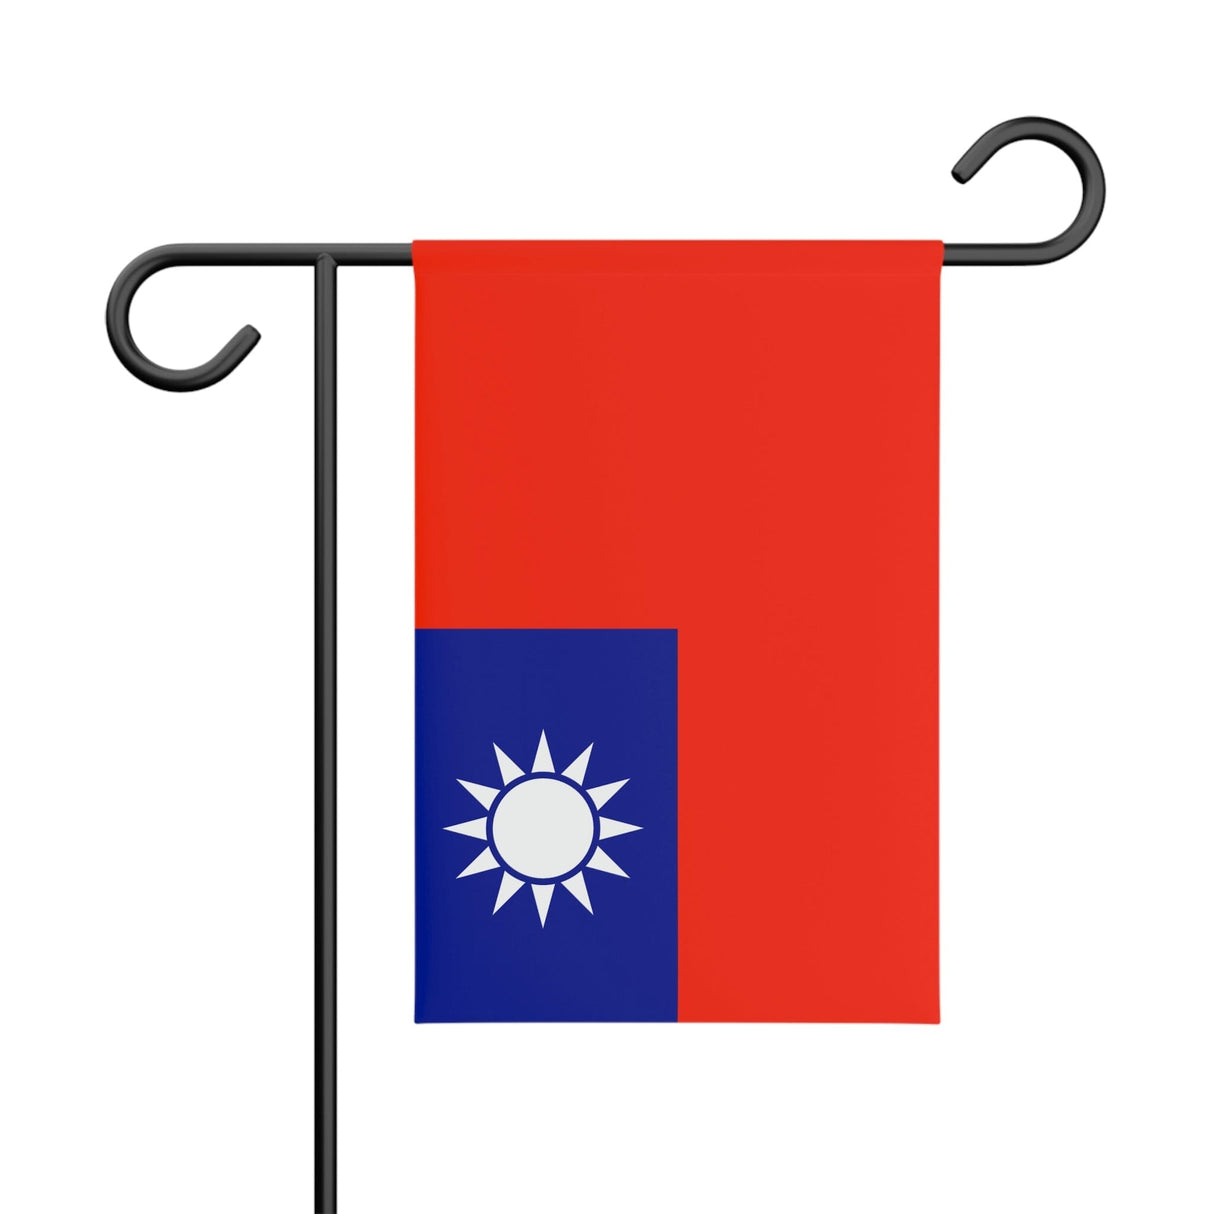 Taiwan Garden Flag 100% Polyester Double-Sided Print - Pixelforma